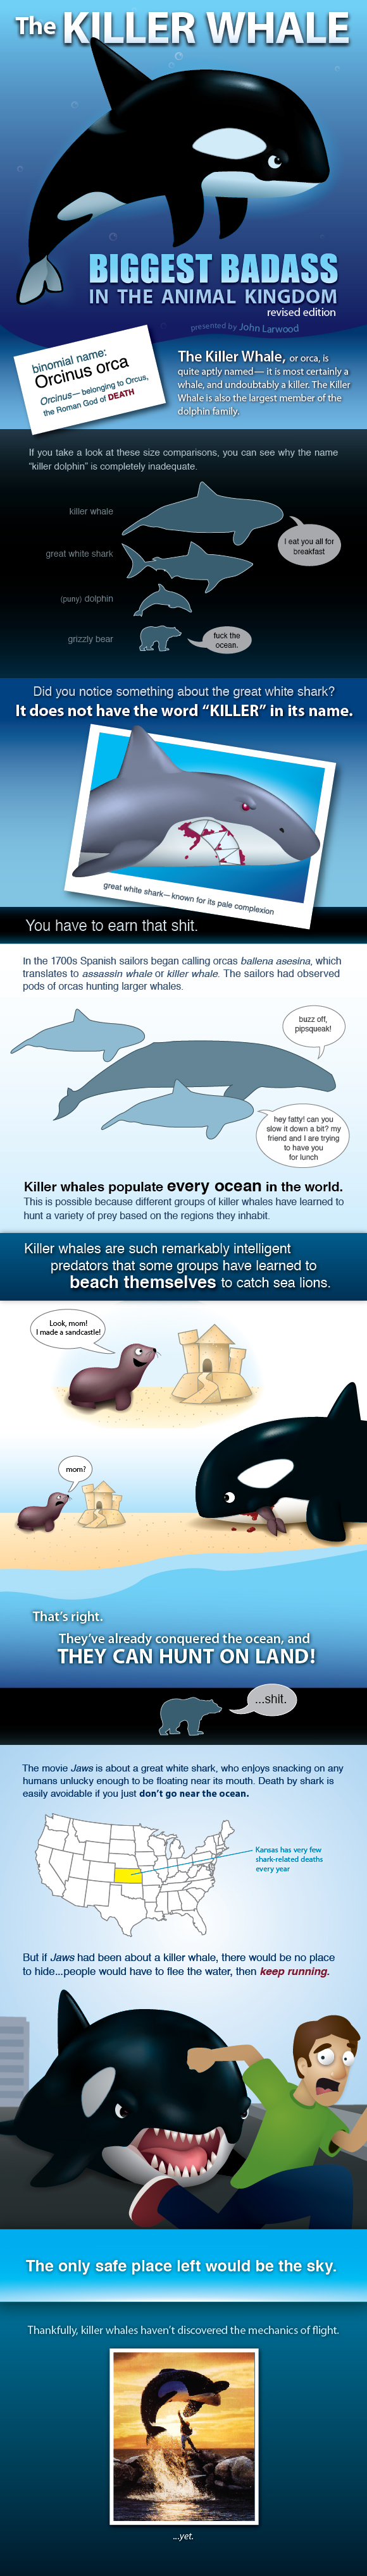 Killer Whale: Biggest Badass in the Animal Kingdom infographic